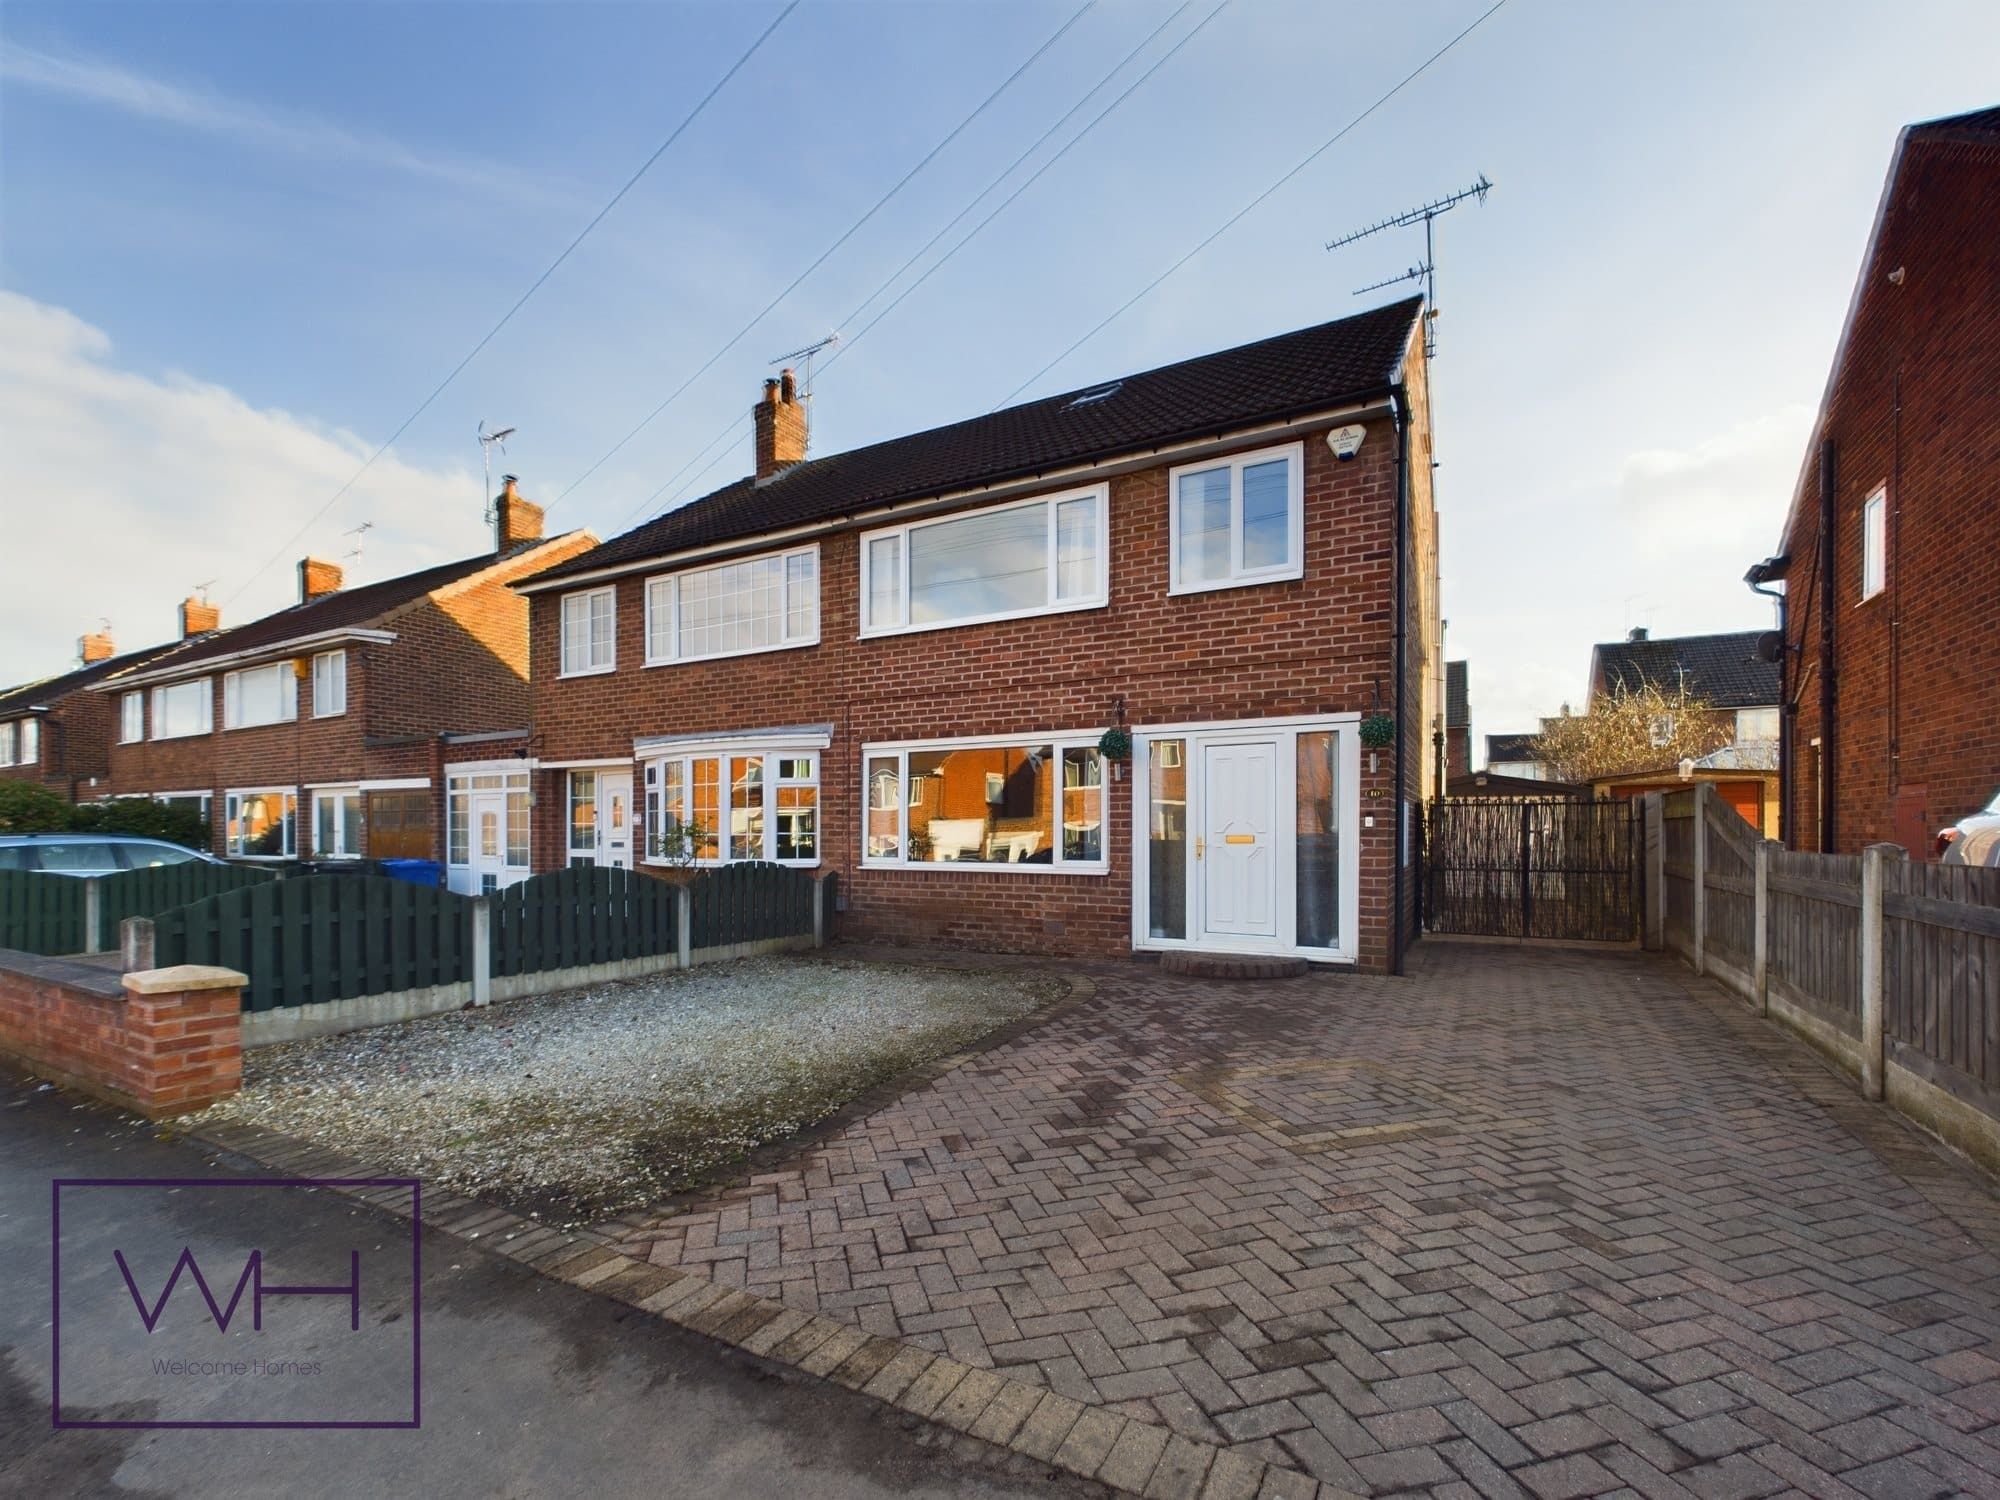 Windsor Walk, Scawsby, Doncaster, DN5 8NQ